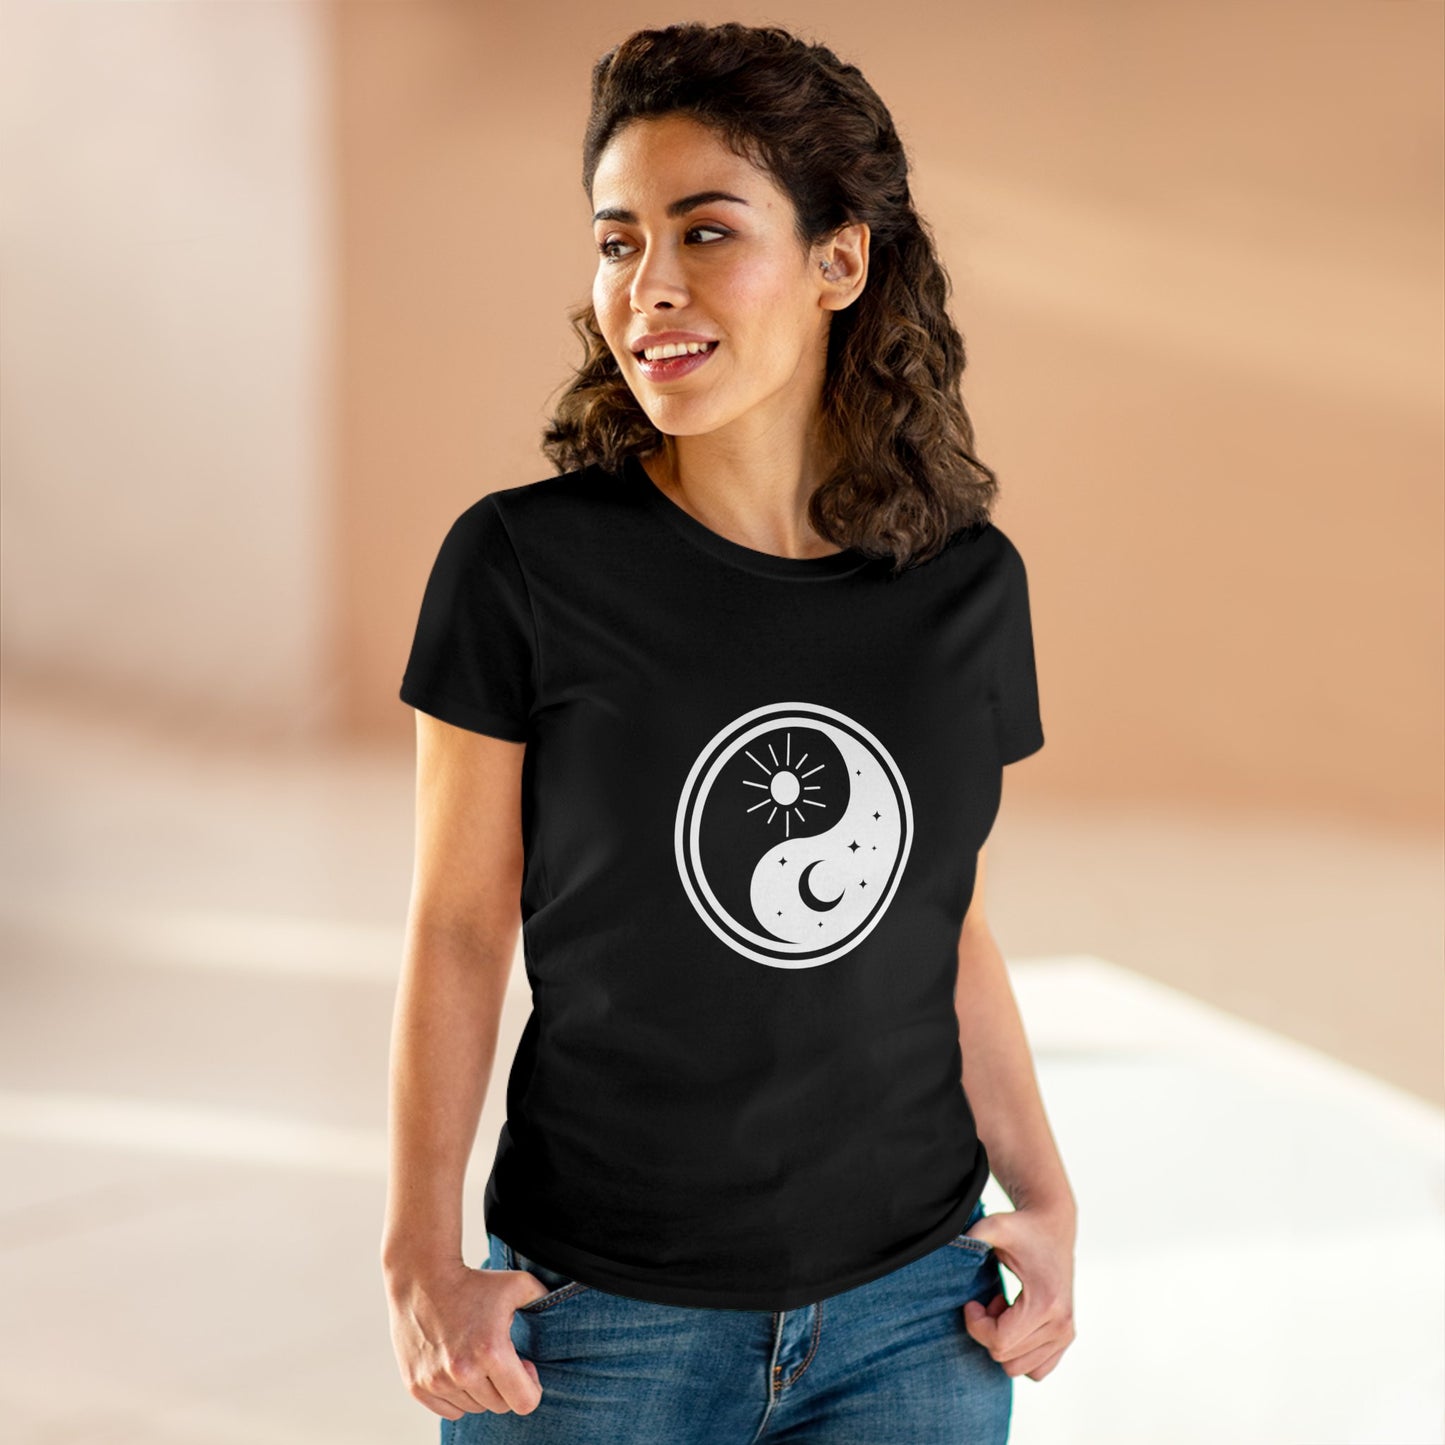 Symbol, Ying Yang, Sun and Moon - Adult, Semi-fitted, T-shirt